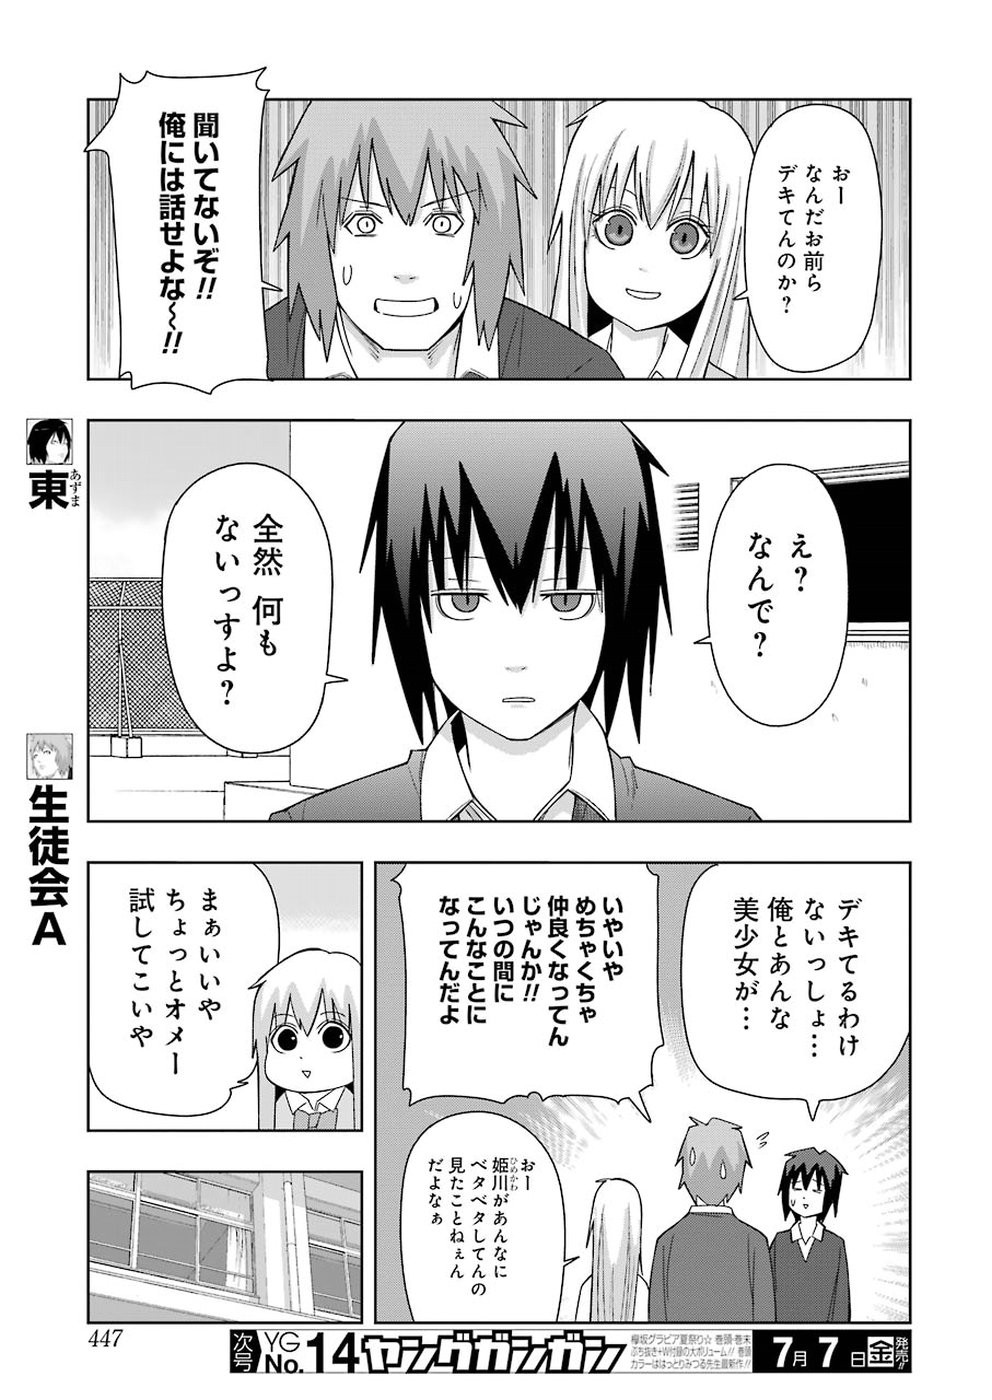 + Tic Nee-san - Chapter 148 - Page 3